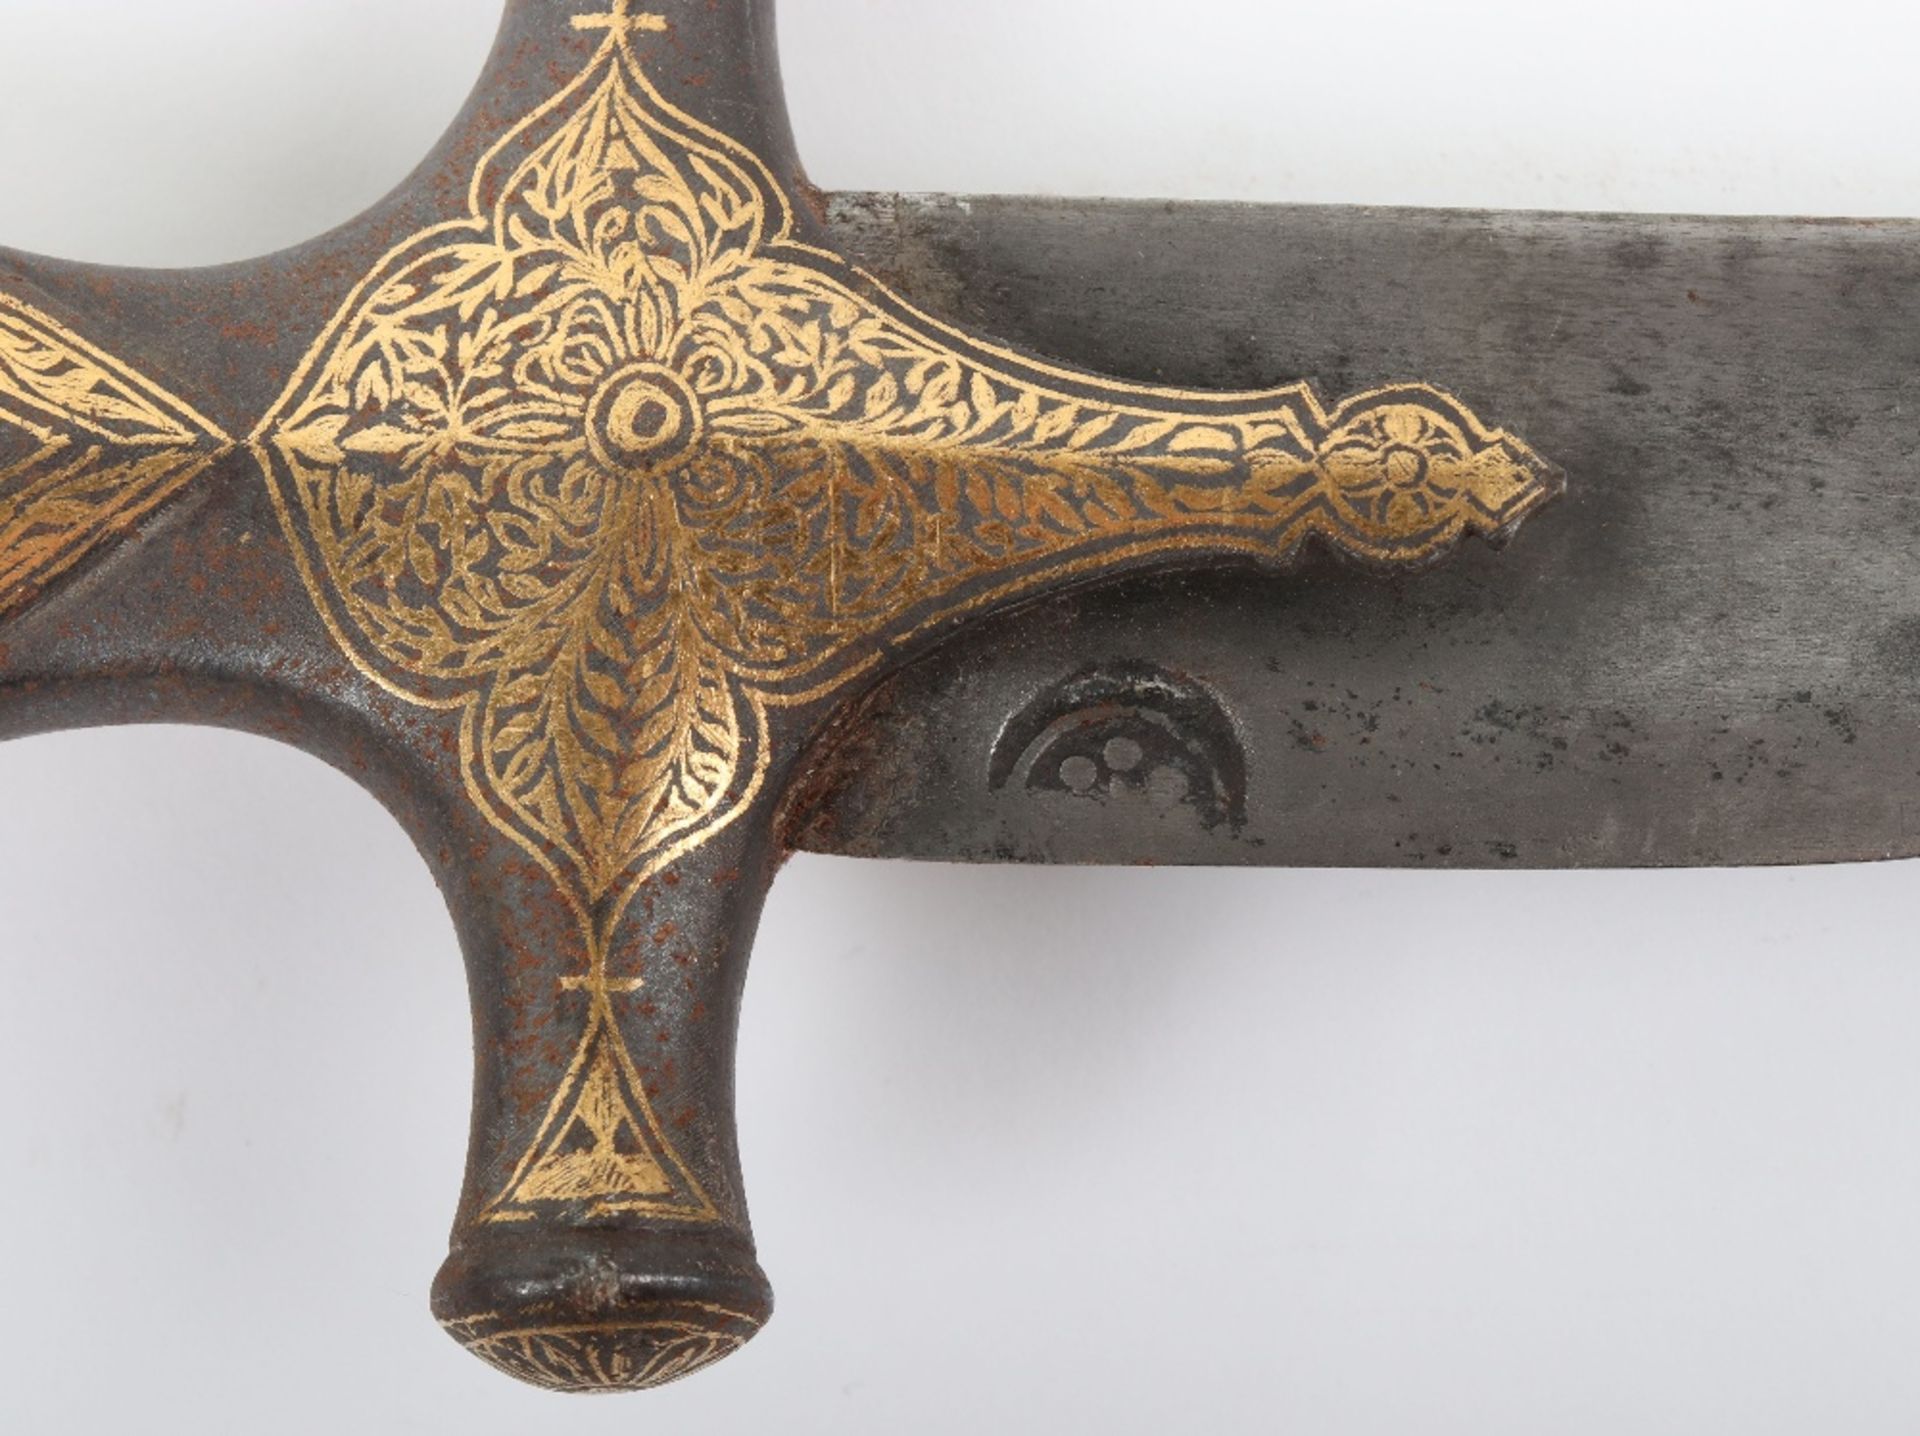 Decorative Indian Sword Tulwar Perhaps for a Youth - Image 6 of 13